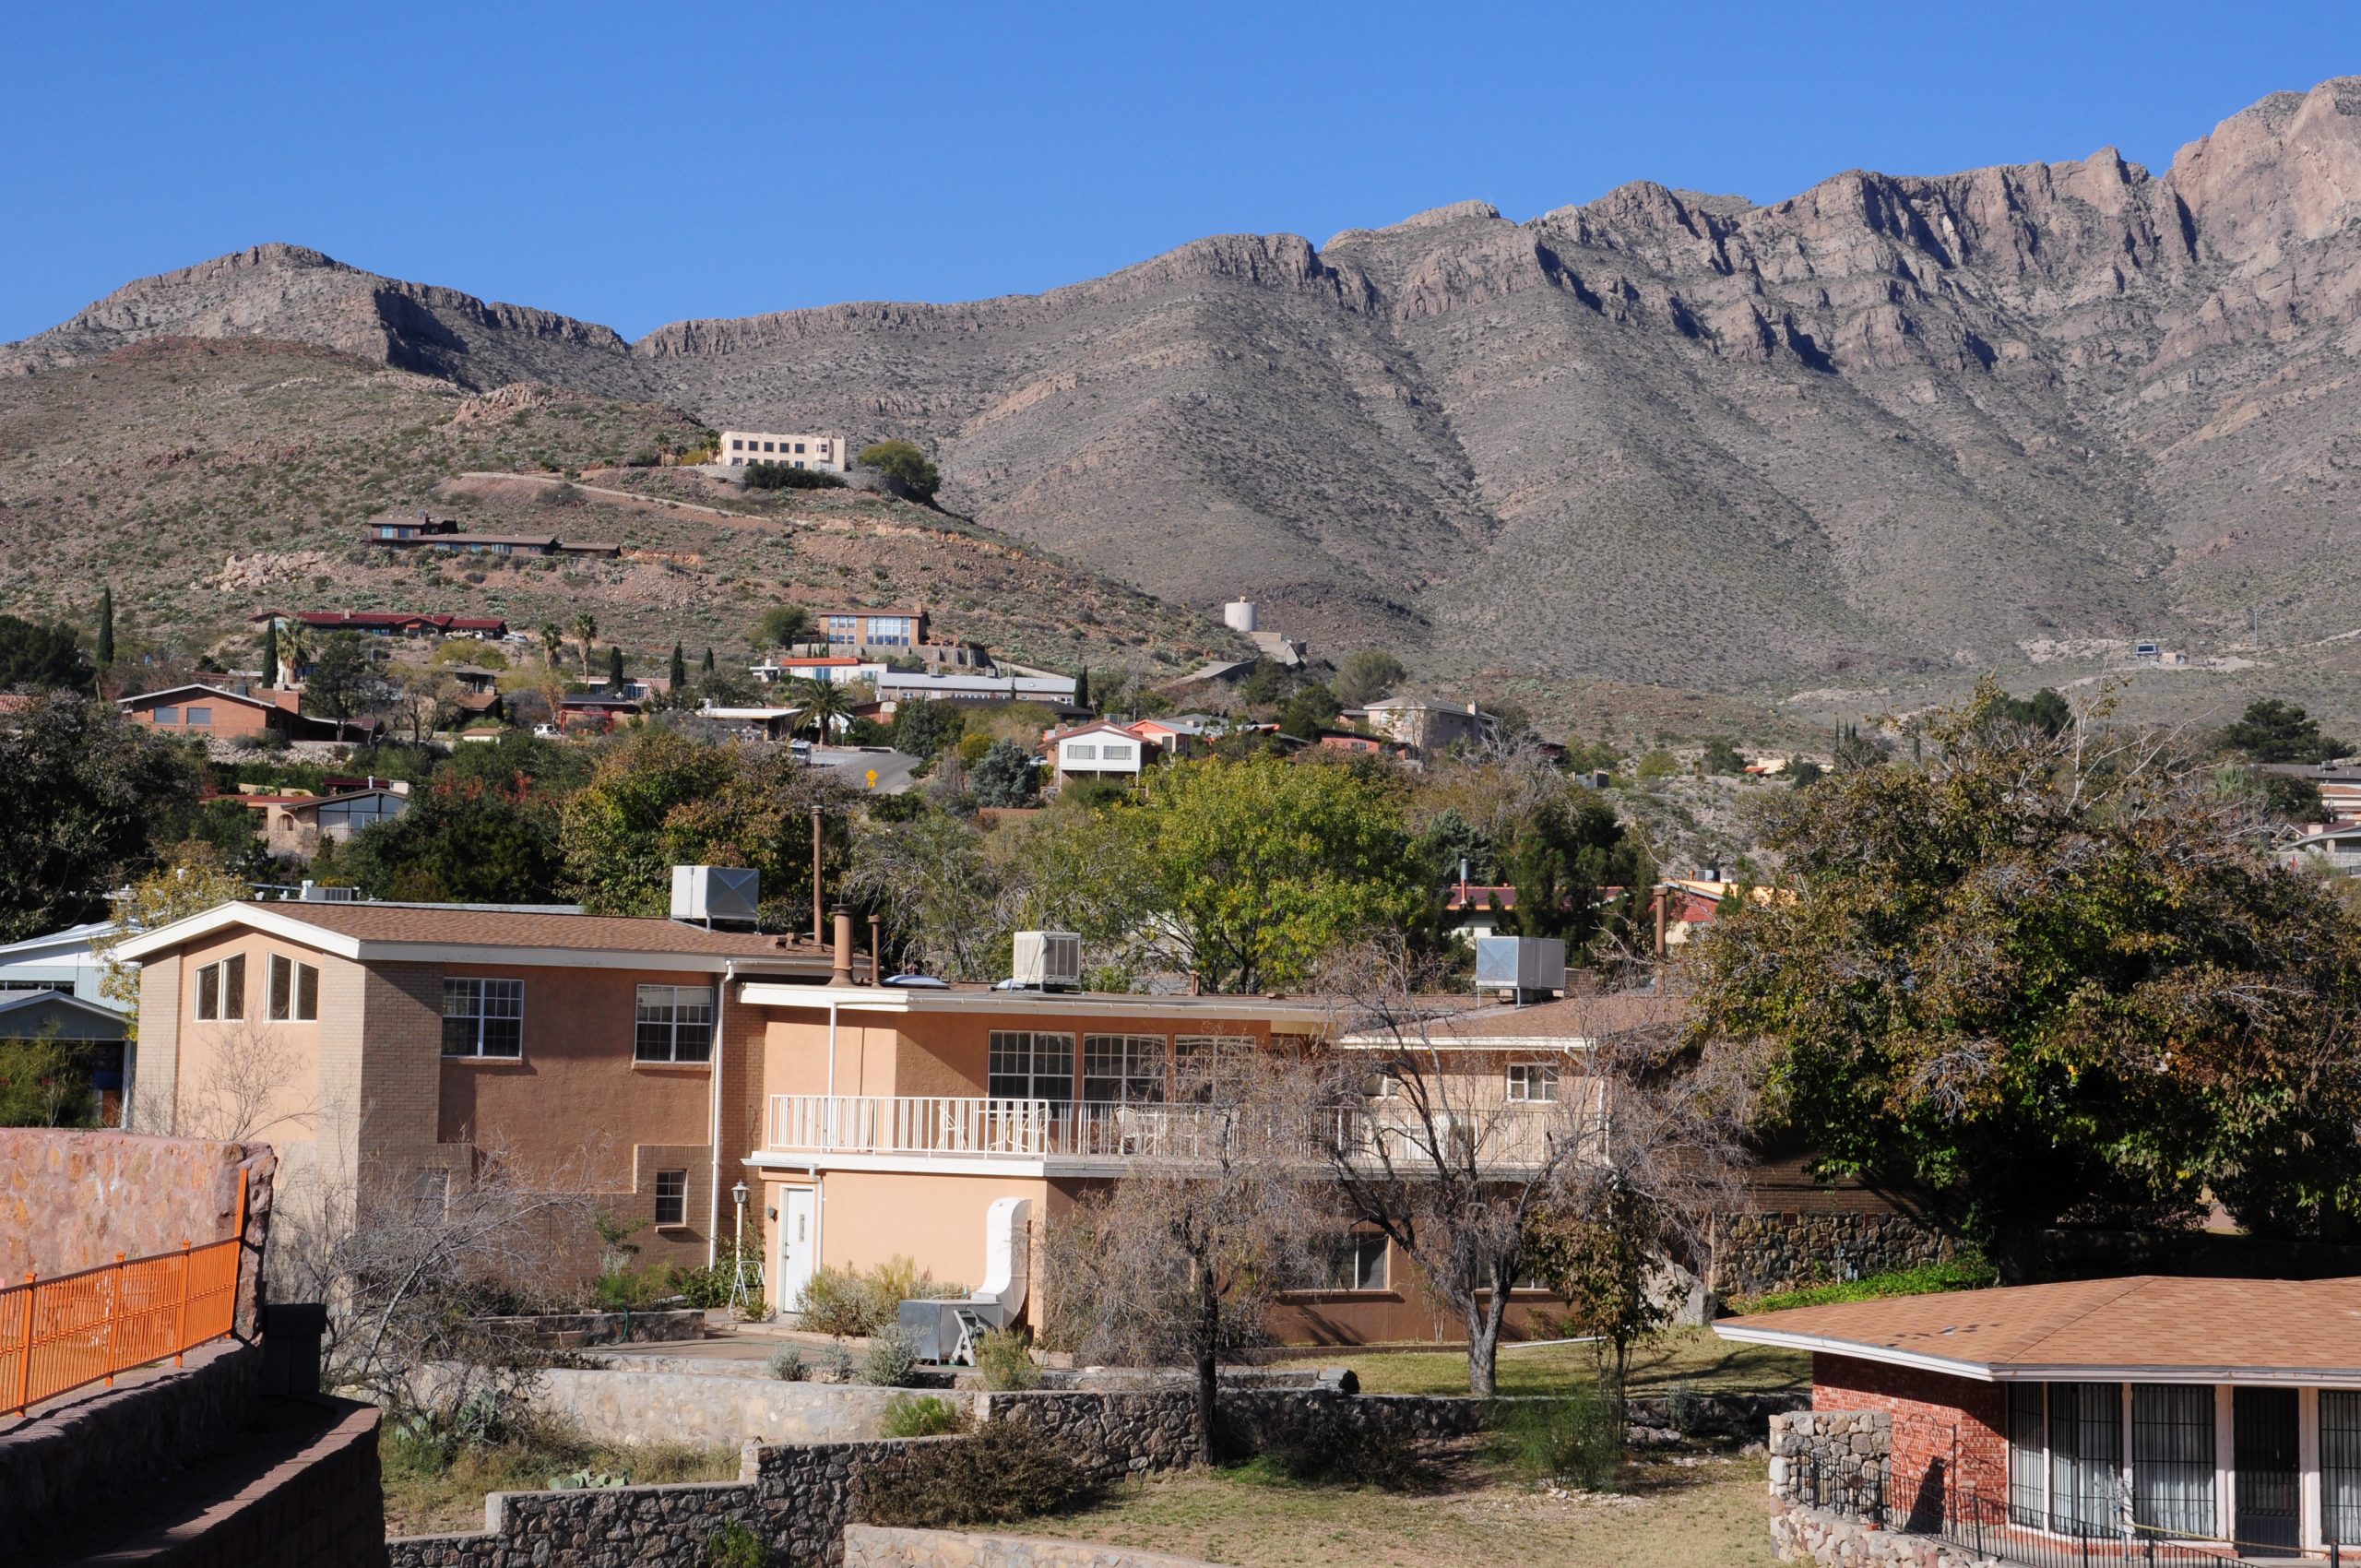 View from Devil's Tower of the back of our family home with the top deck on Titanic Avenue in Mountain Park, El Paso, Texas
Photo ©2018 Ann James Massey